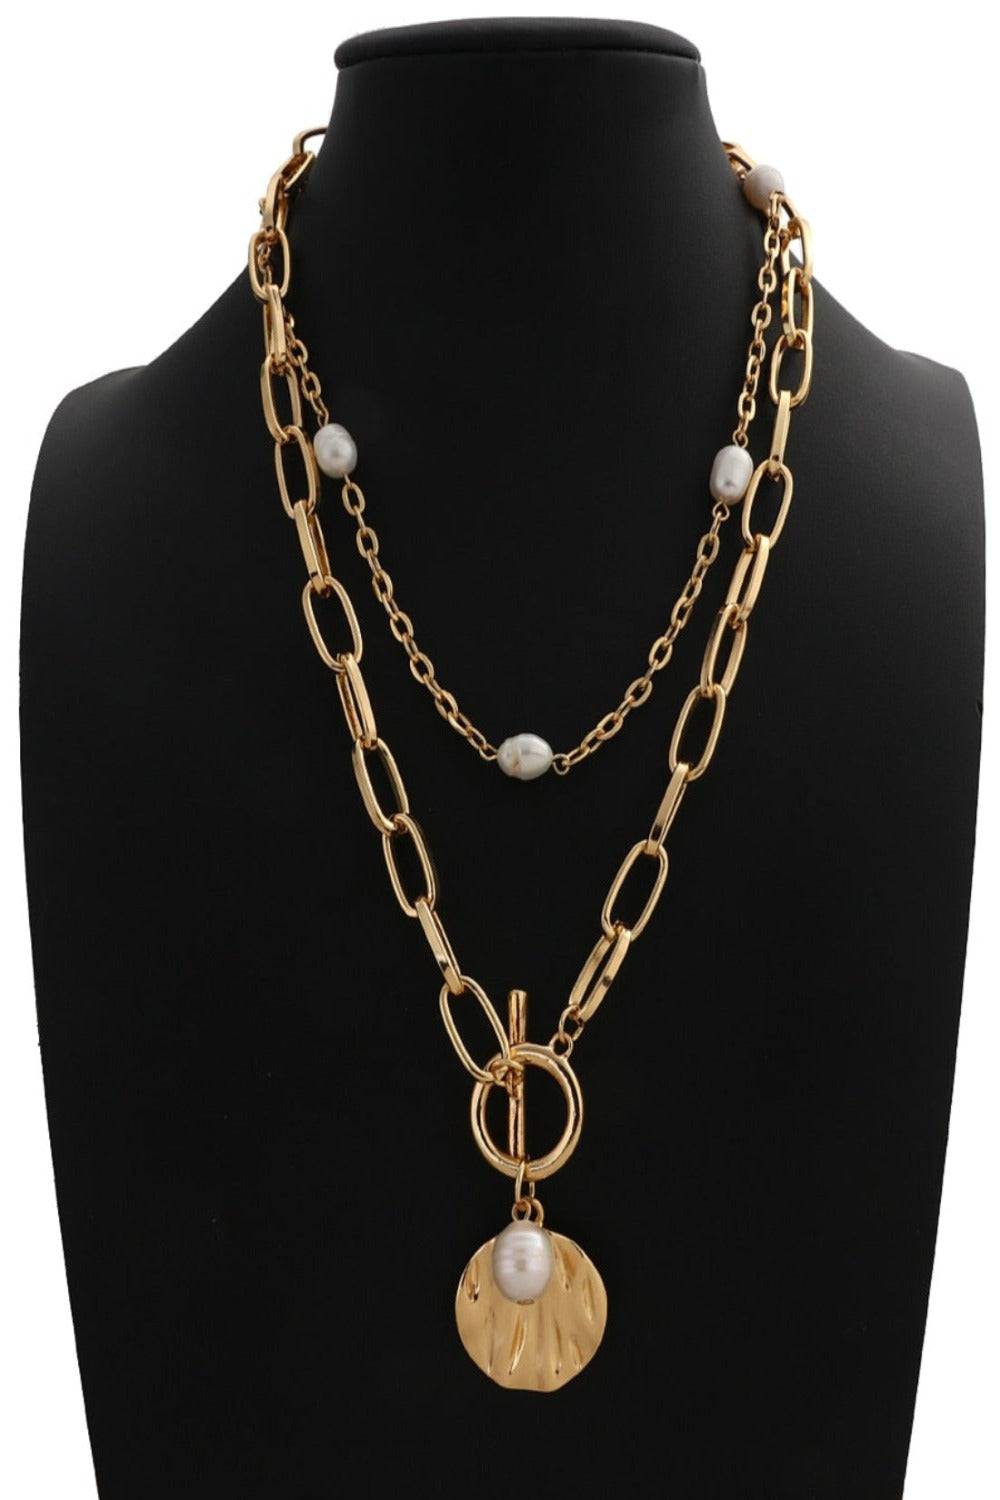 2 Tier Pearl Chain Pendant Gold Layered Necklace - TGC Boutique - Gold Necklace